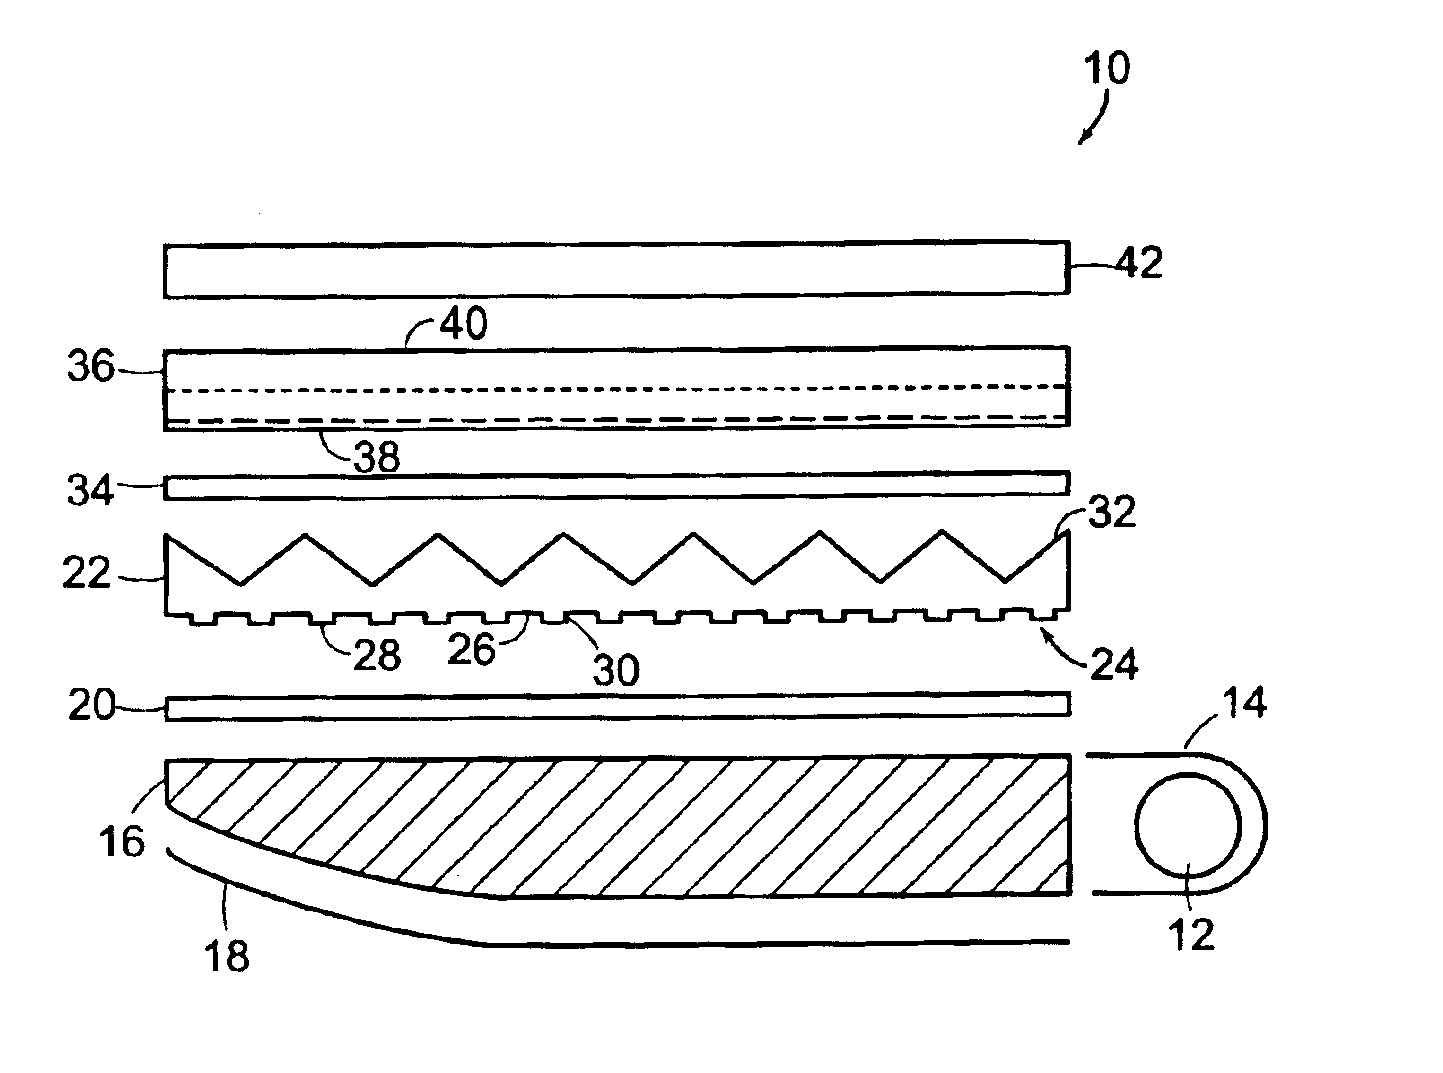 Grooved optical microstructure light collimating films